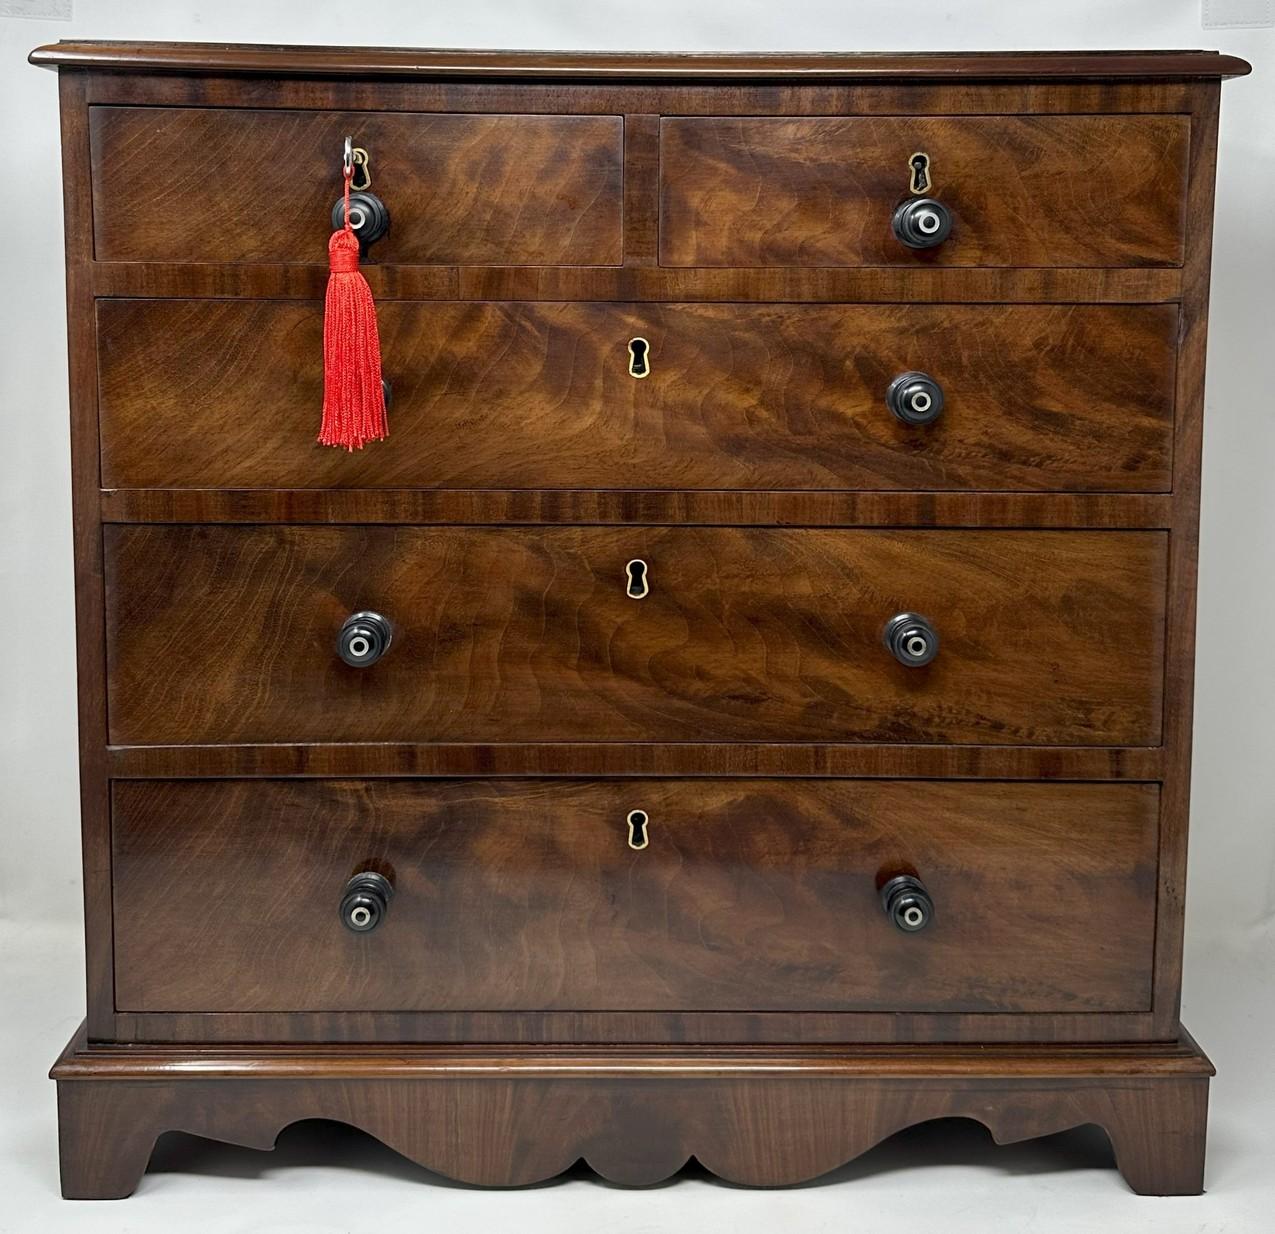 Beautiful English Regency Miniature two over three graduated drawer flame mahogany Chest of Drawers of outstanding quality and workmanship and compact proportions. Circa 1800-20. 

This exquisite and rare sized chest with oak lined drawers, complete